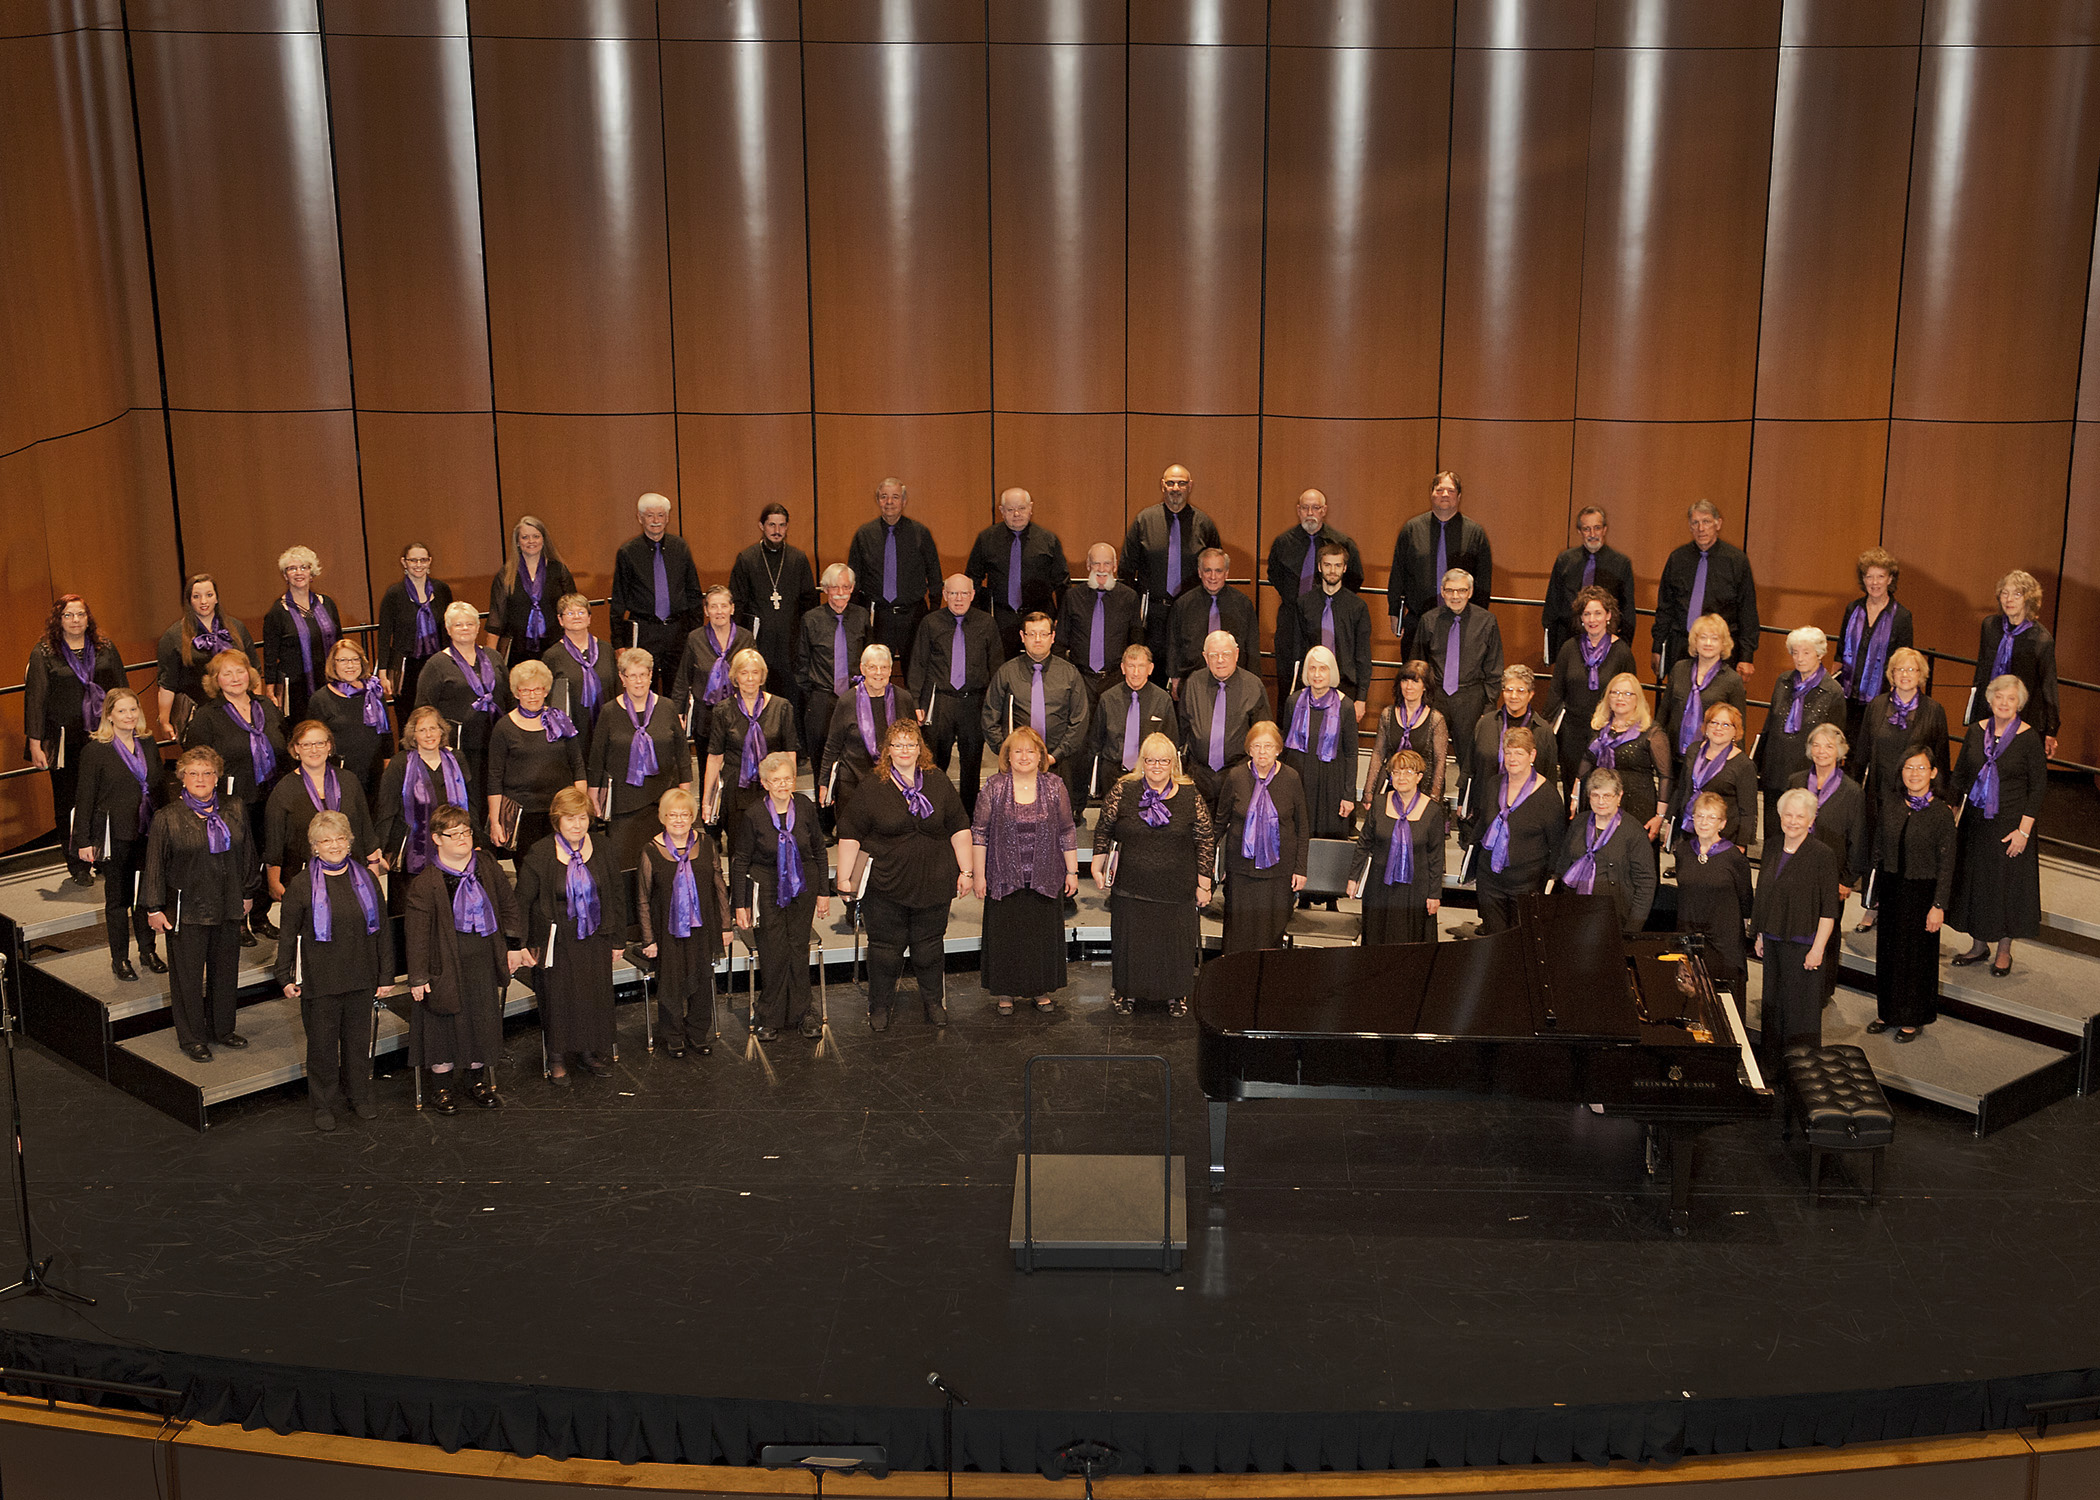 Mount Union Alliance Chorale to Present “Together in Song” November 18